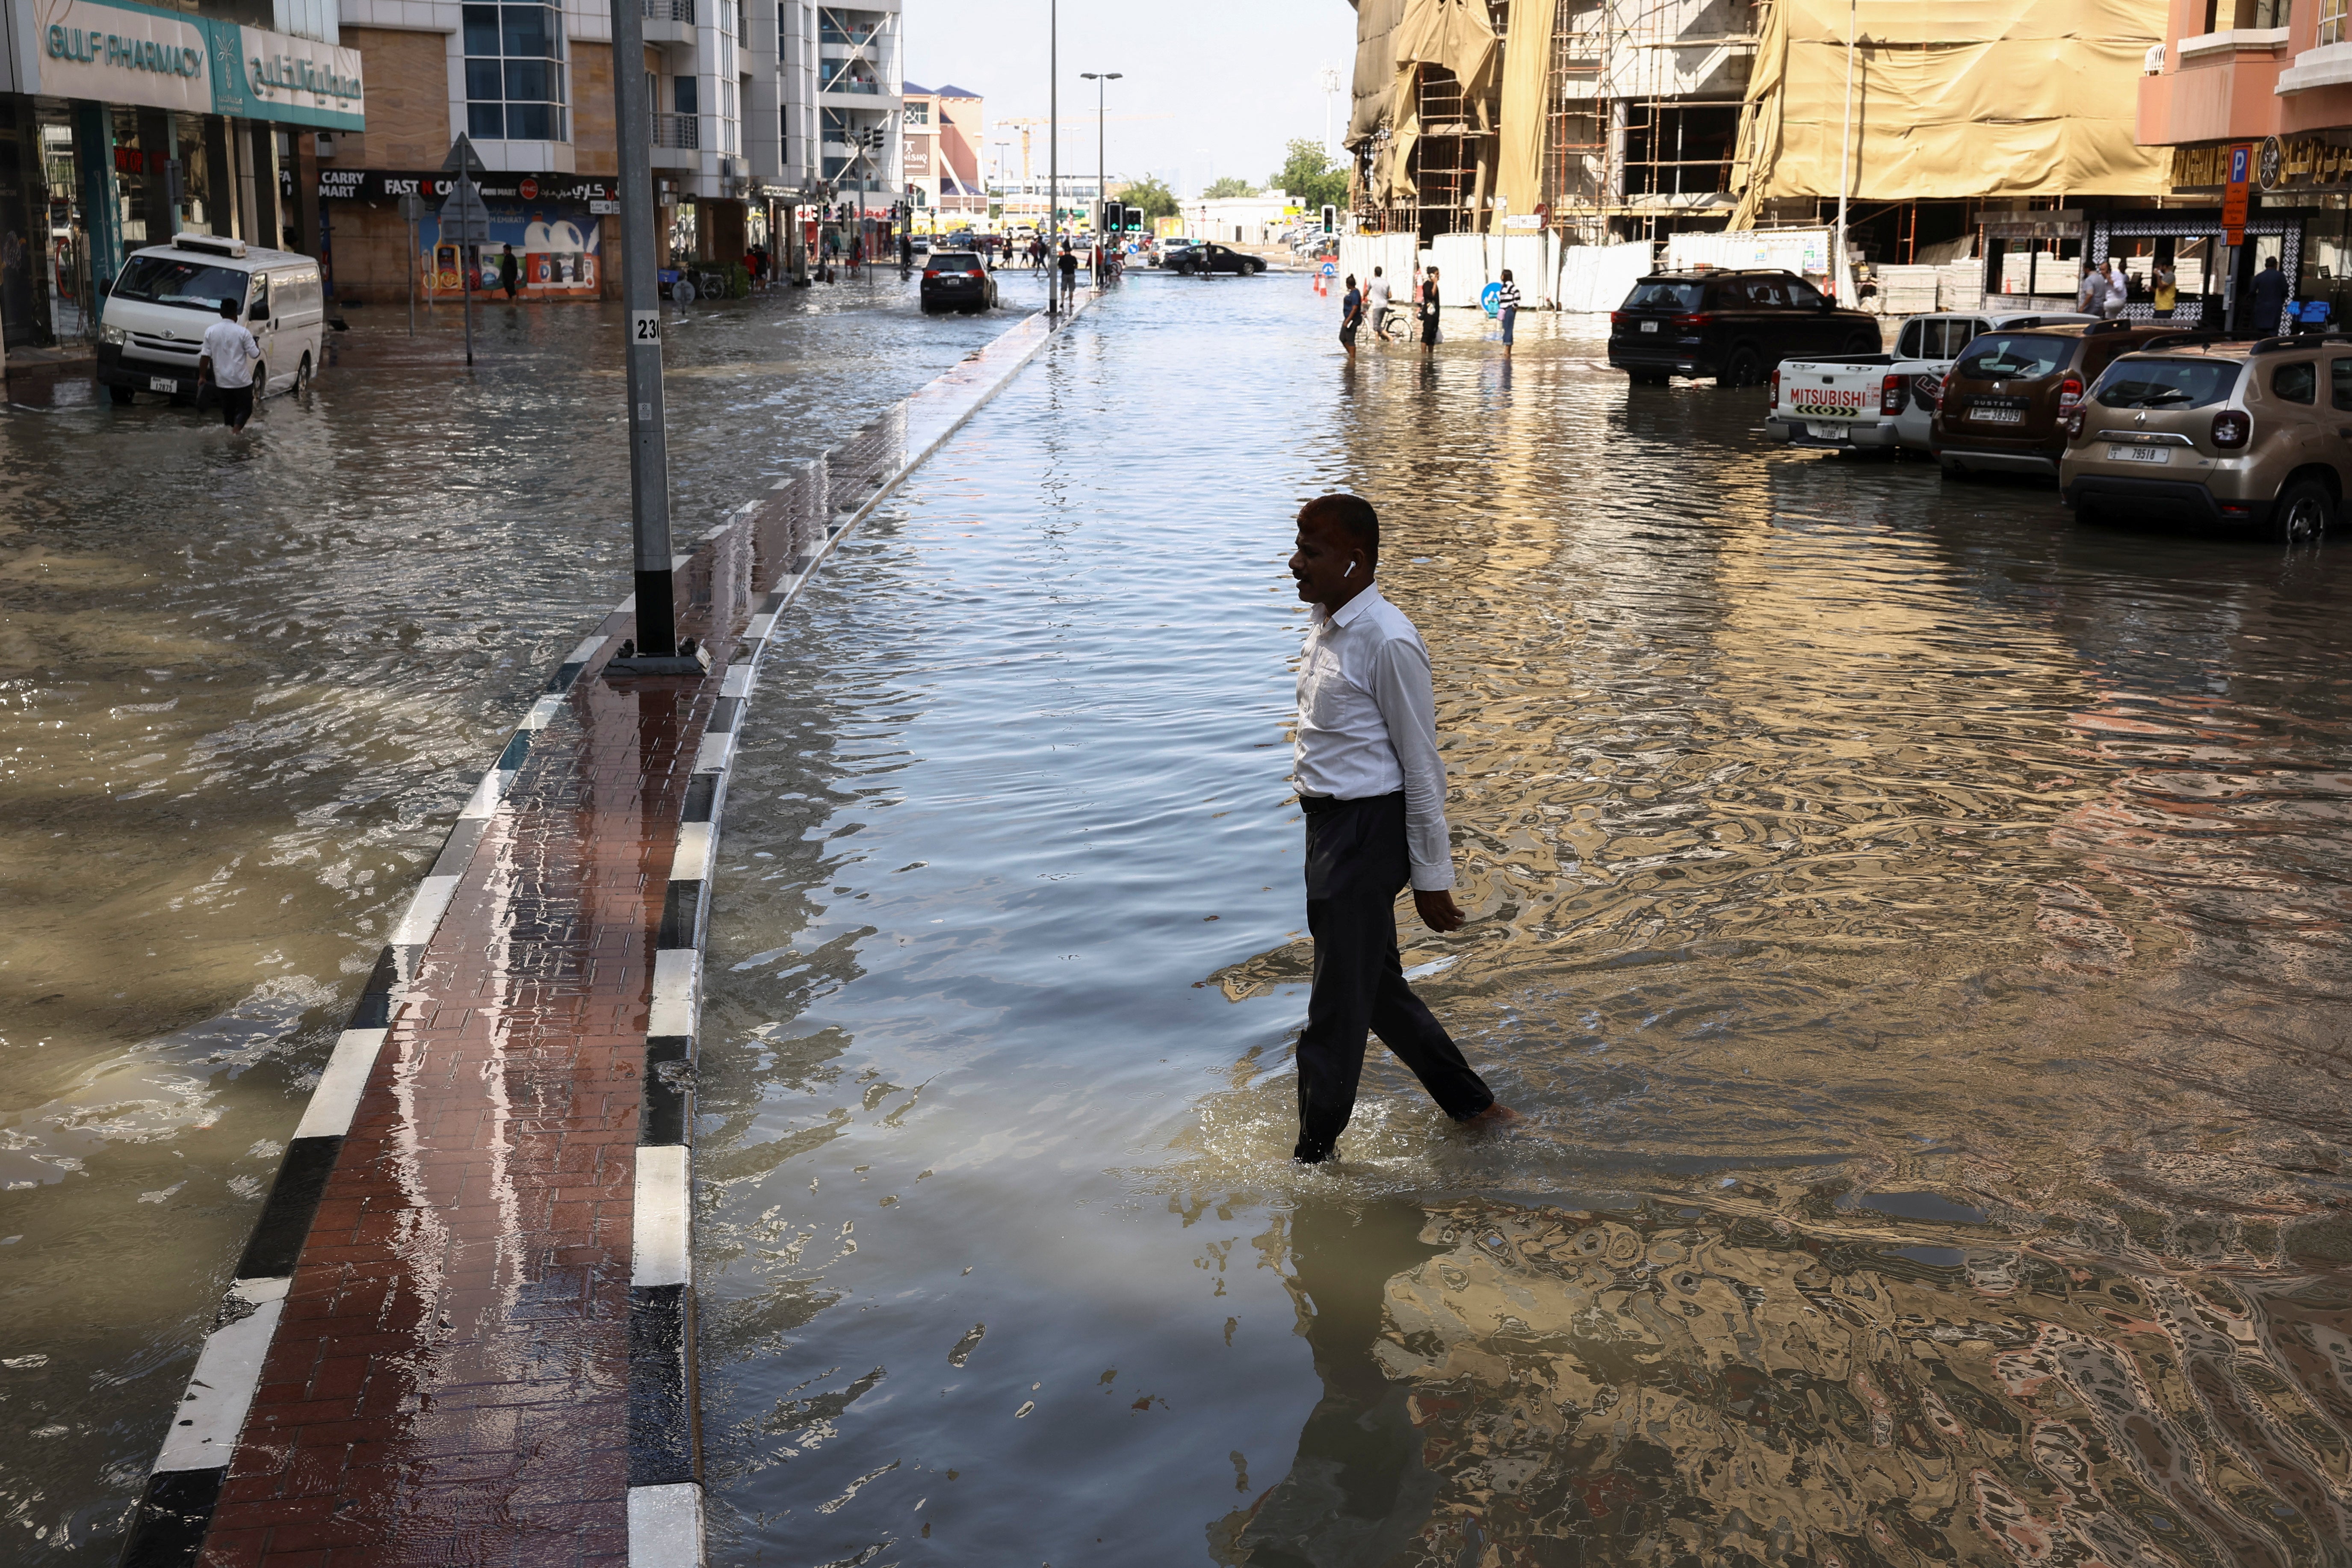 A man walks in the floodwater in the UAE, which experts are divided on as to whether it was caused by ‘cloud seeding’